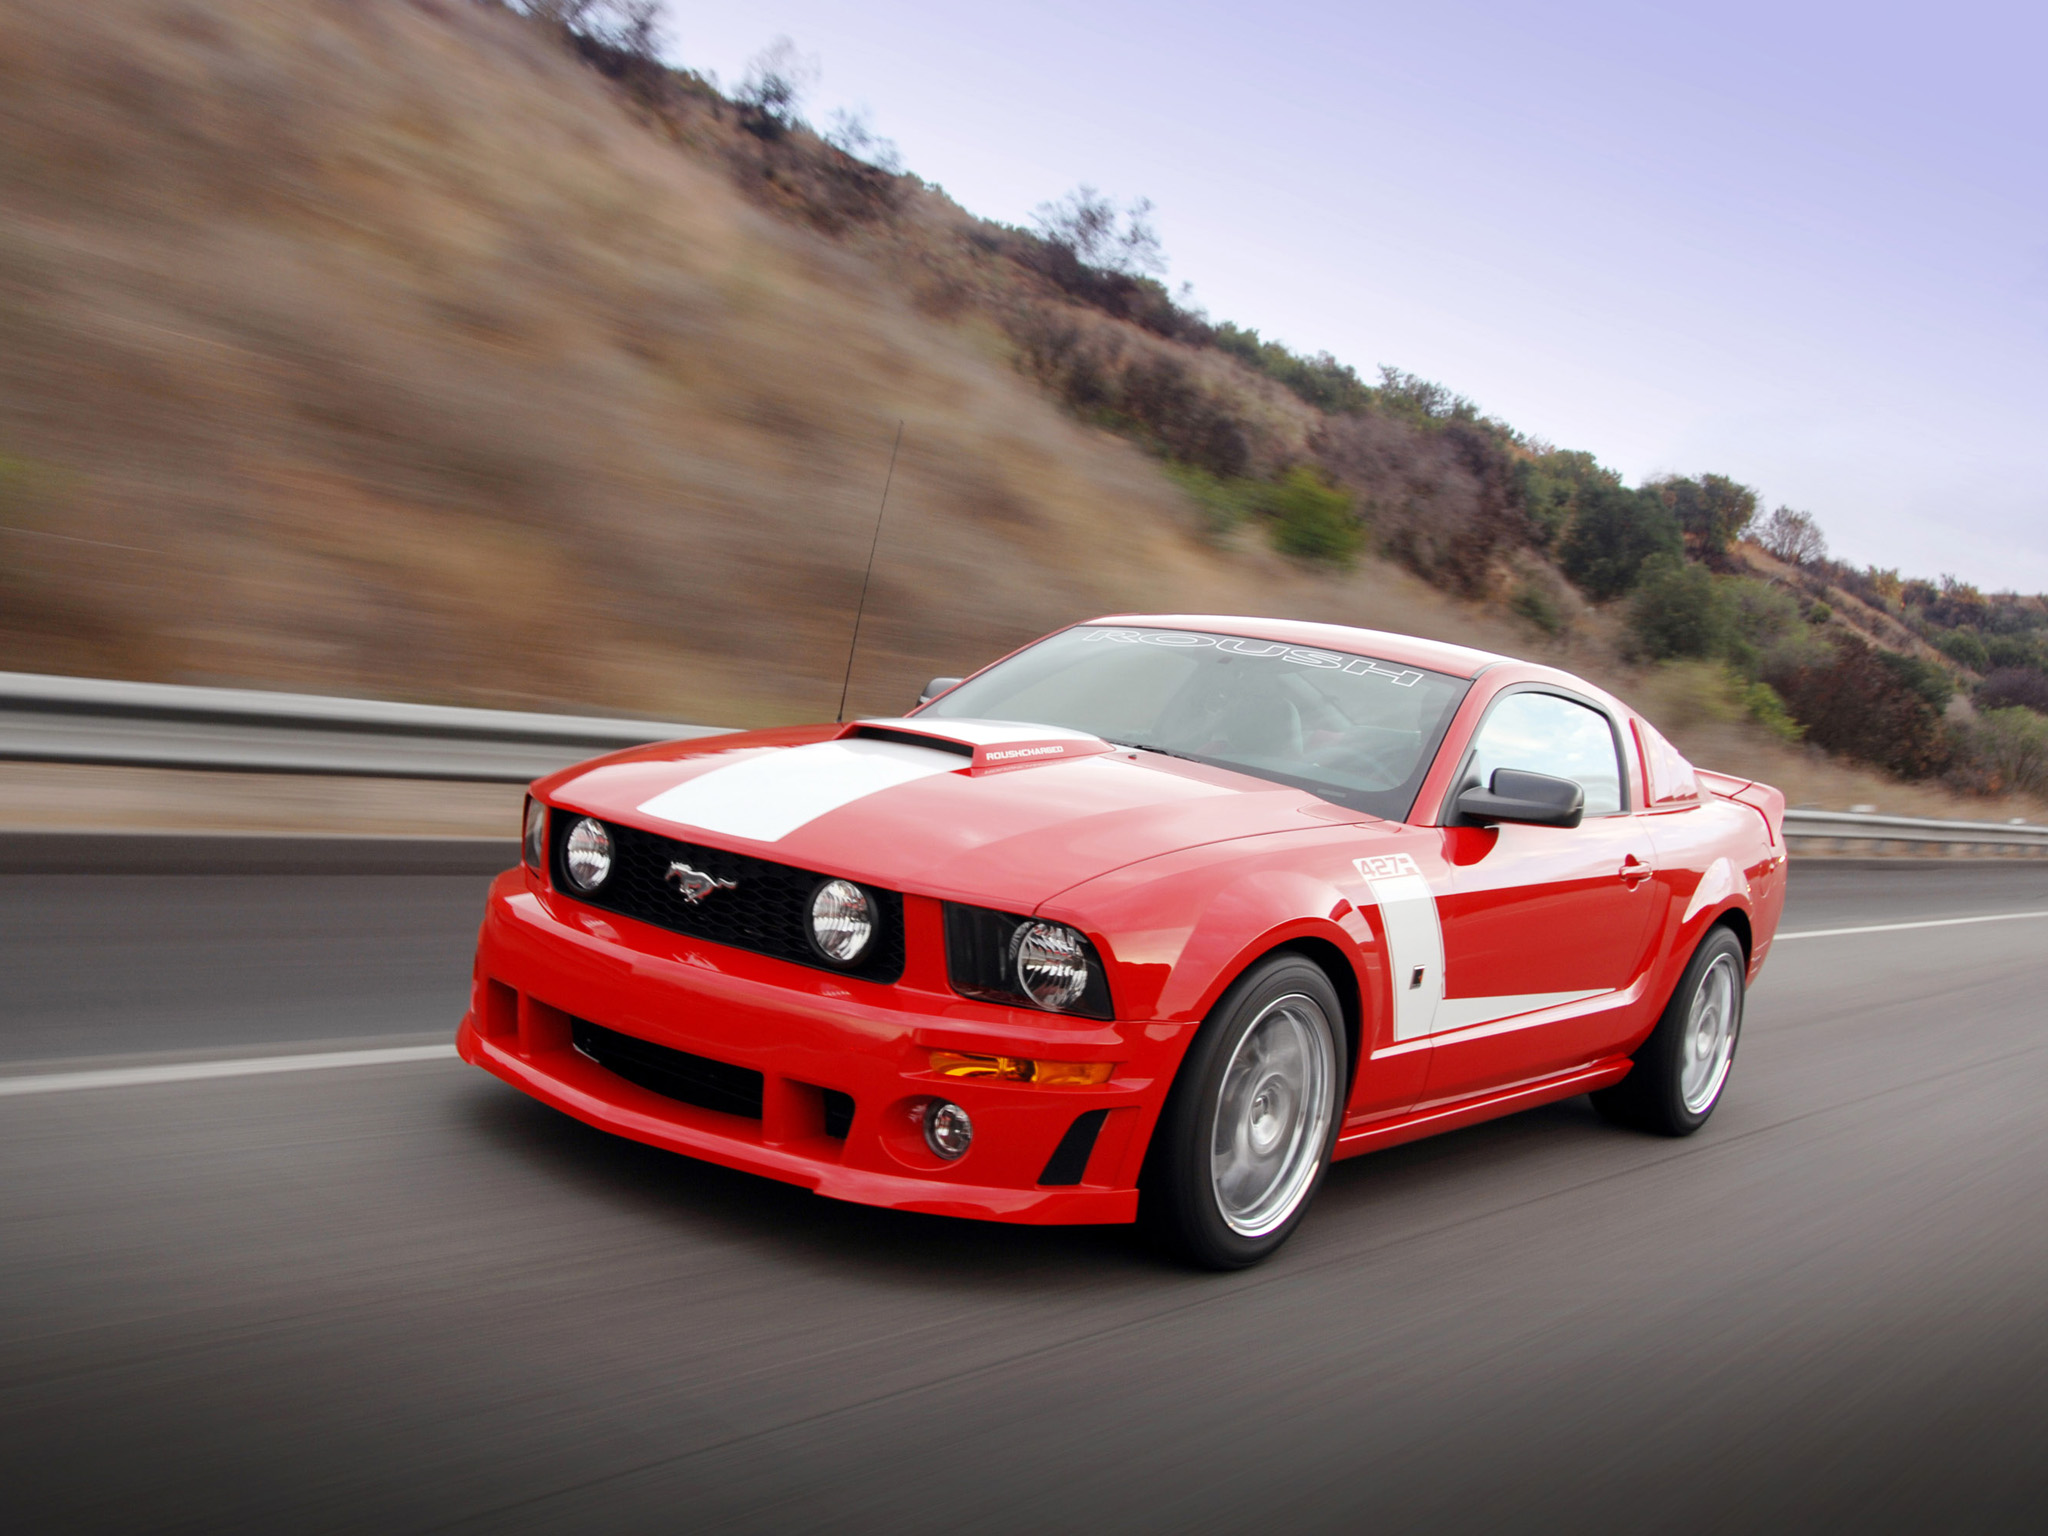 2009 Roush Ford Mustang 427r Muscle Tuning Hot Rod - Ford Mustang 2009 Tuning , HD Wallpaper & Backgrounds